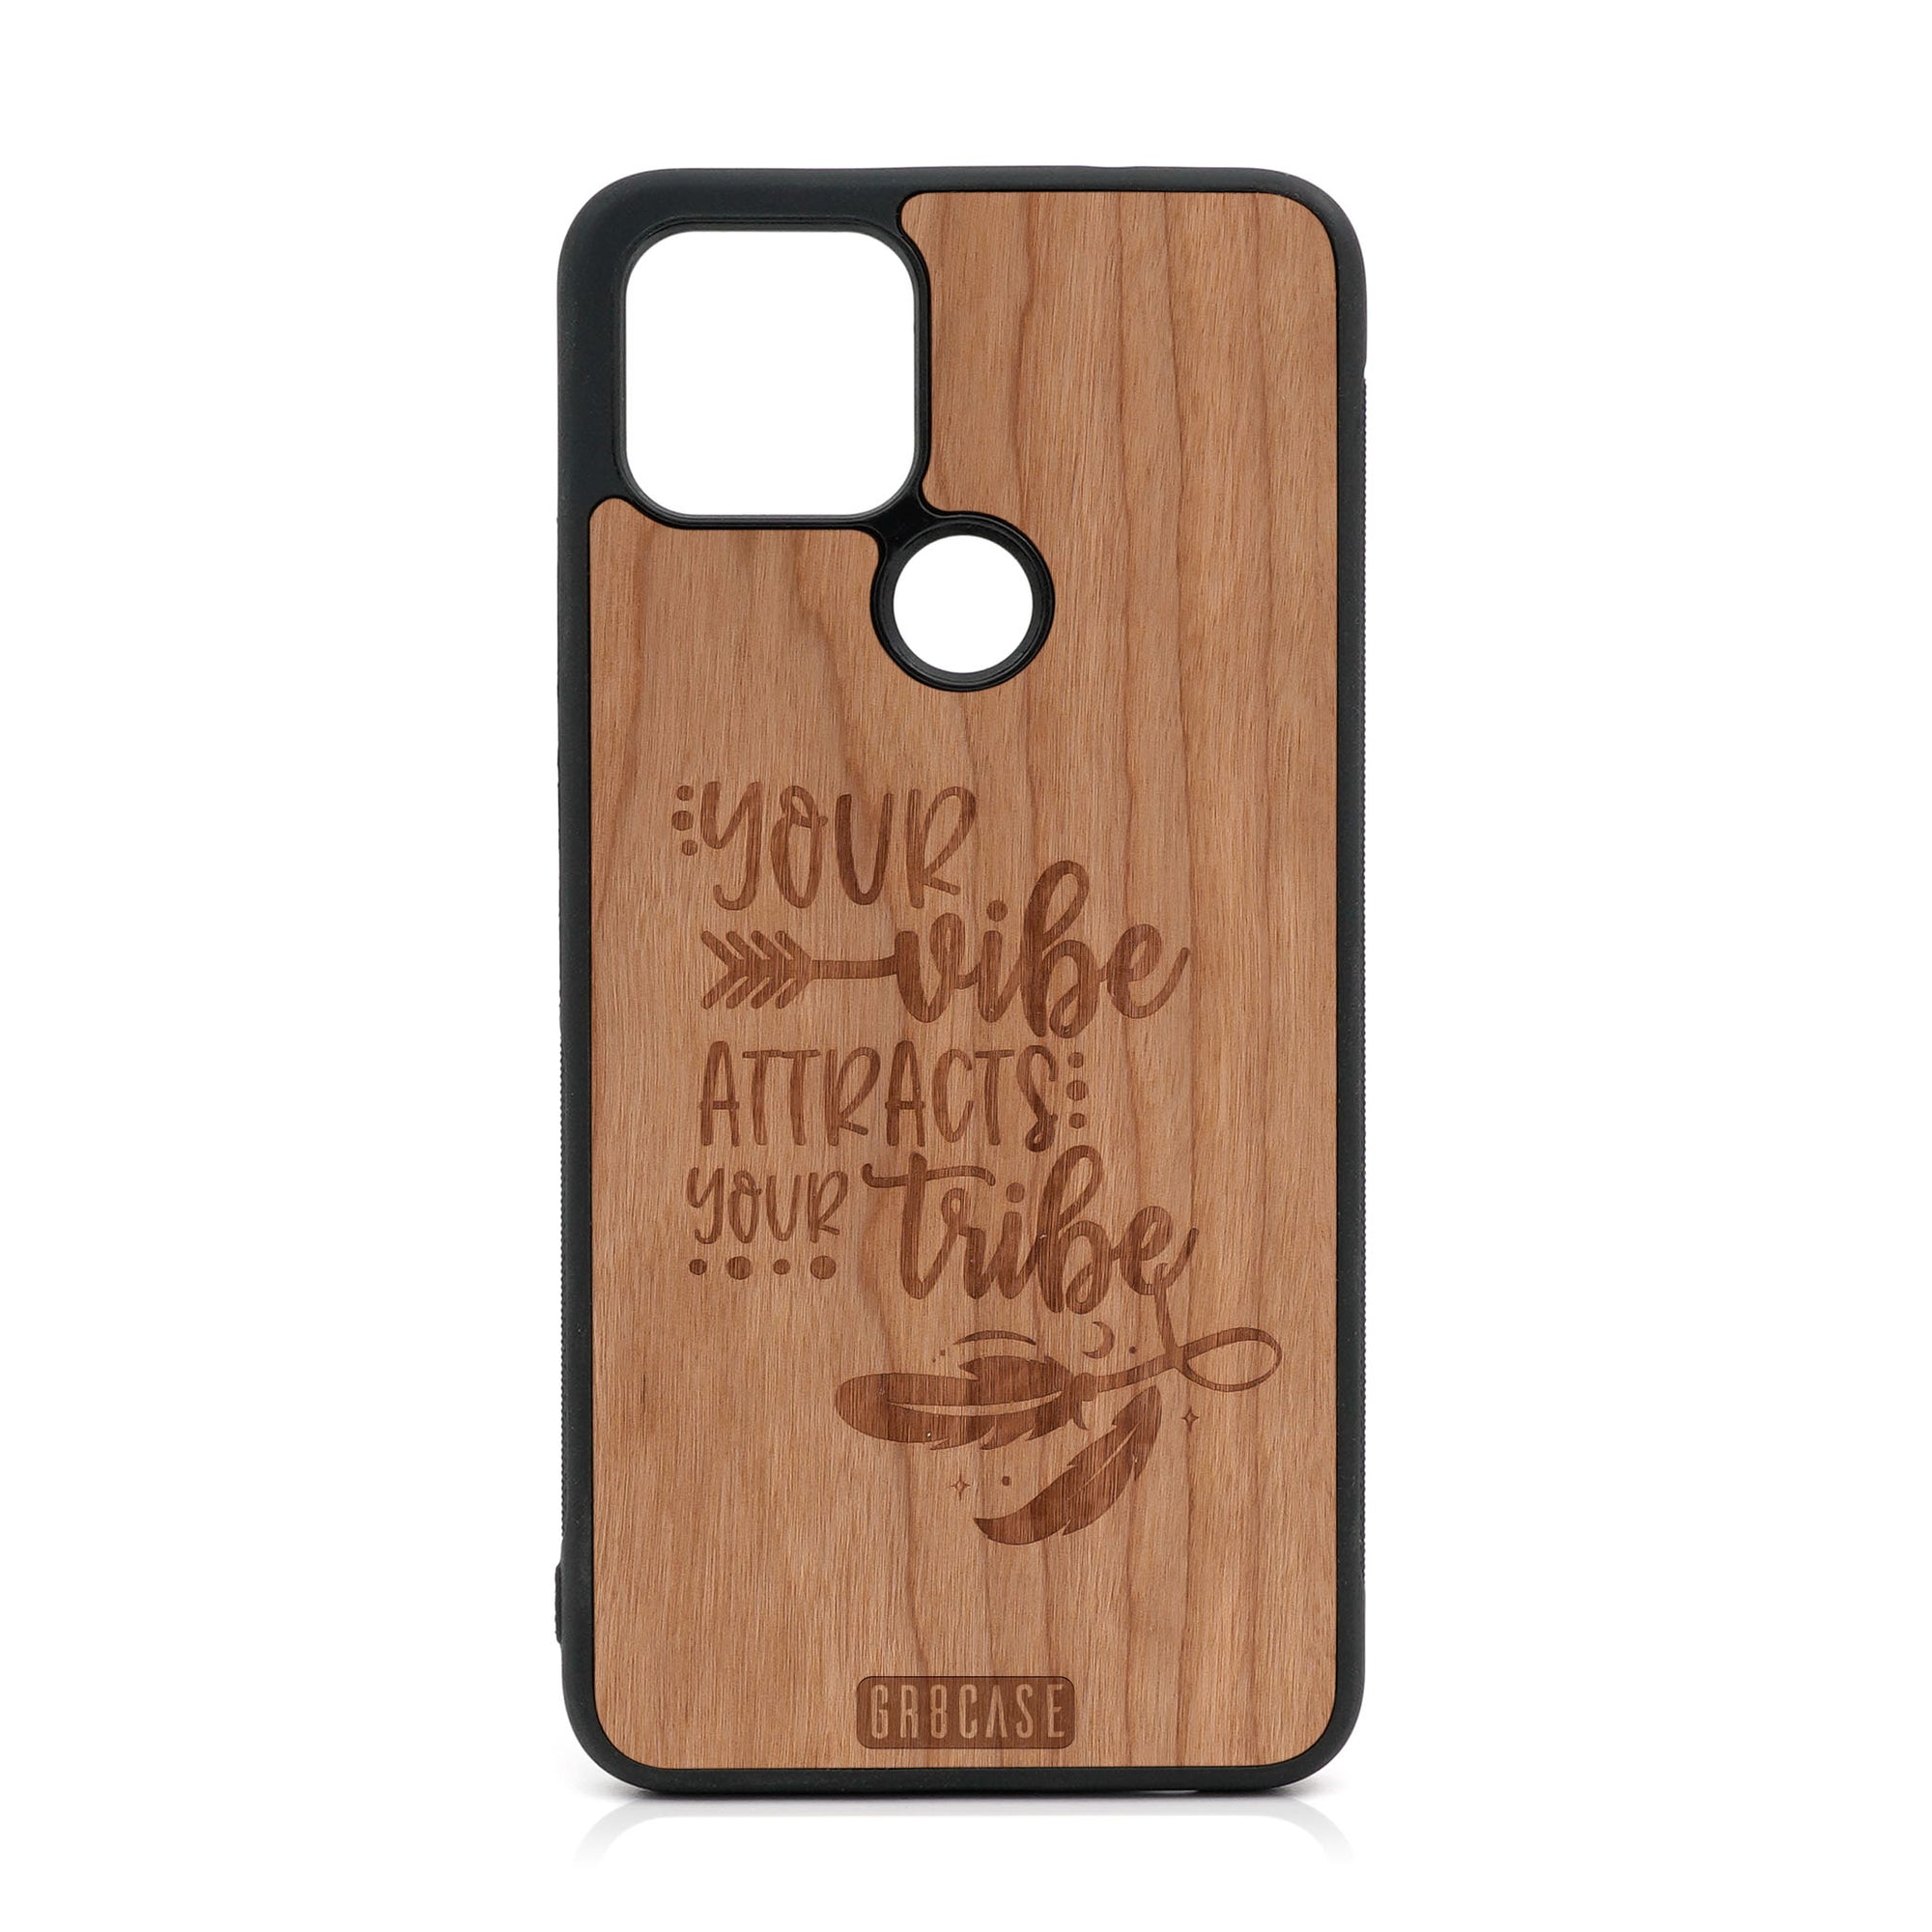 Your Vibe Attracts Your Tribe Design Wood Case For Google Pixel 5 XL/4A 5G